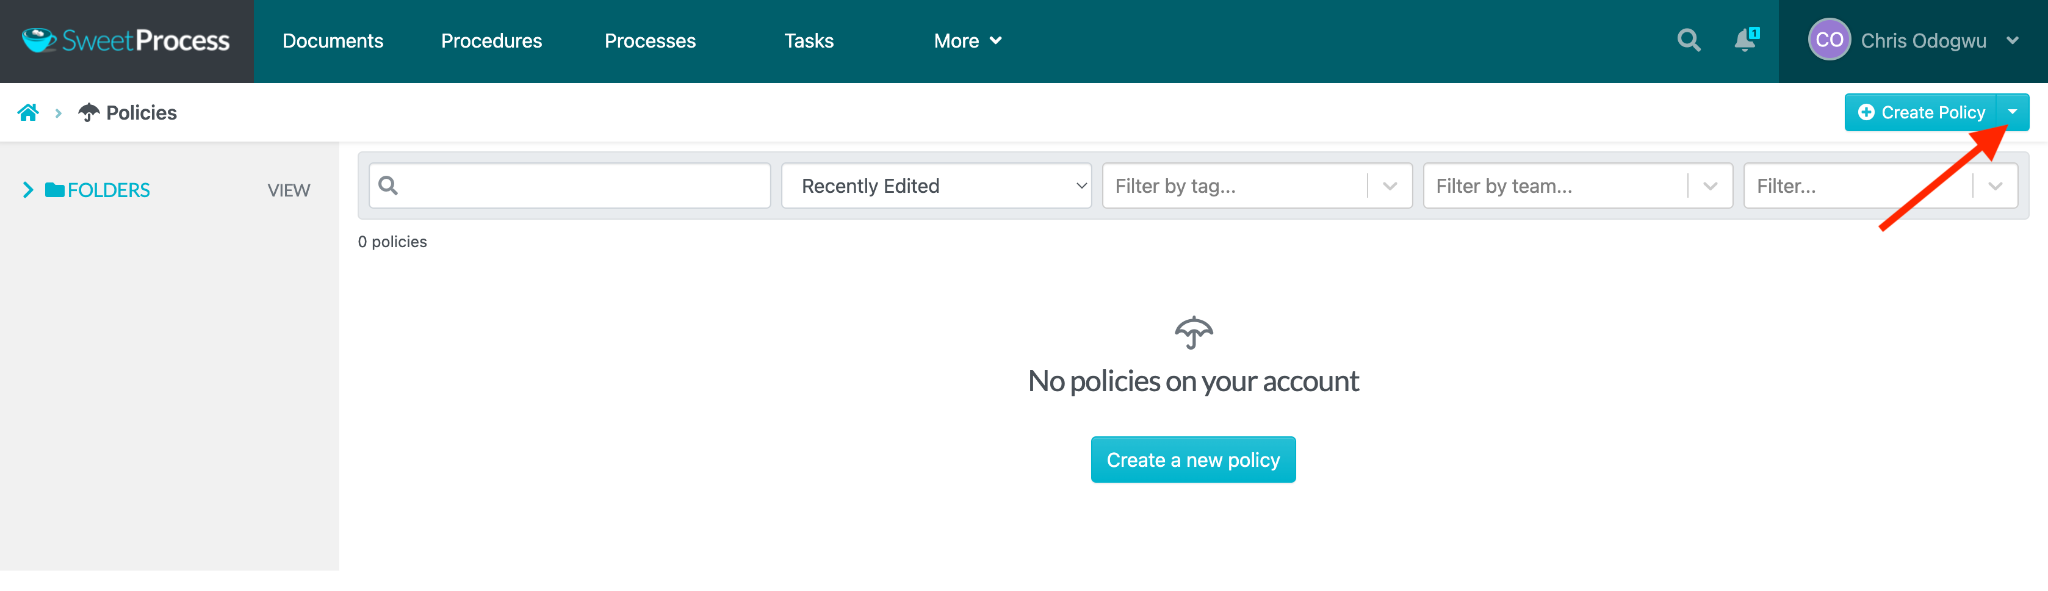 Click on the button beside “Create Policy” on the right.